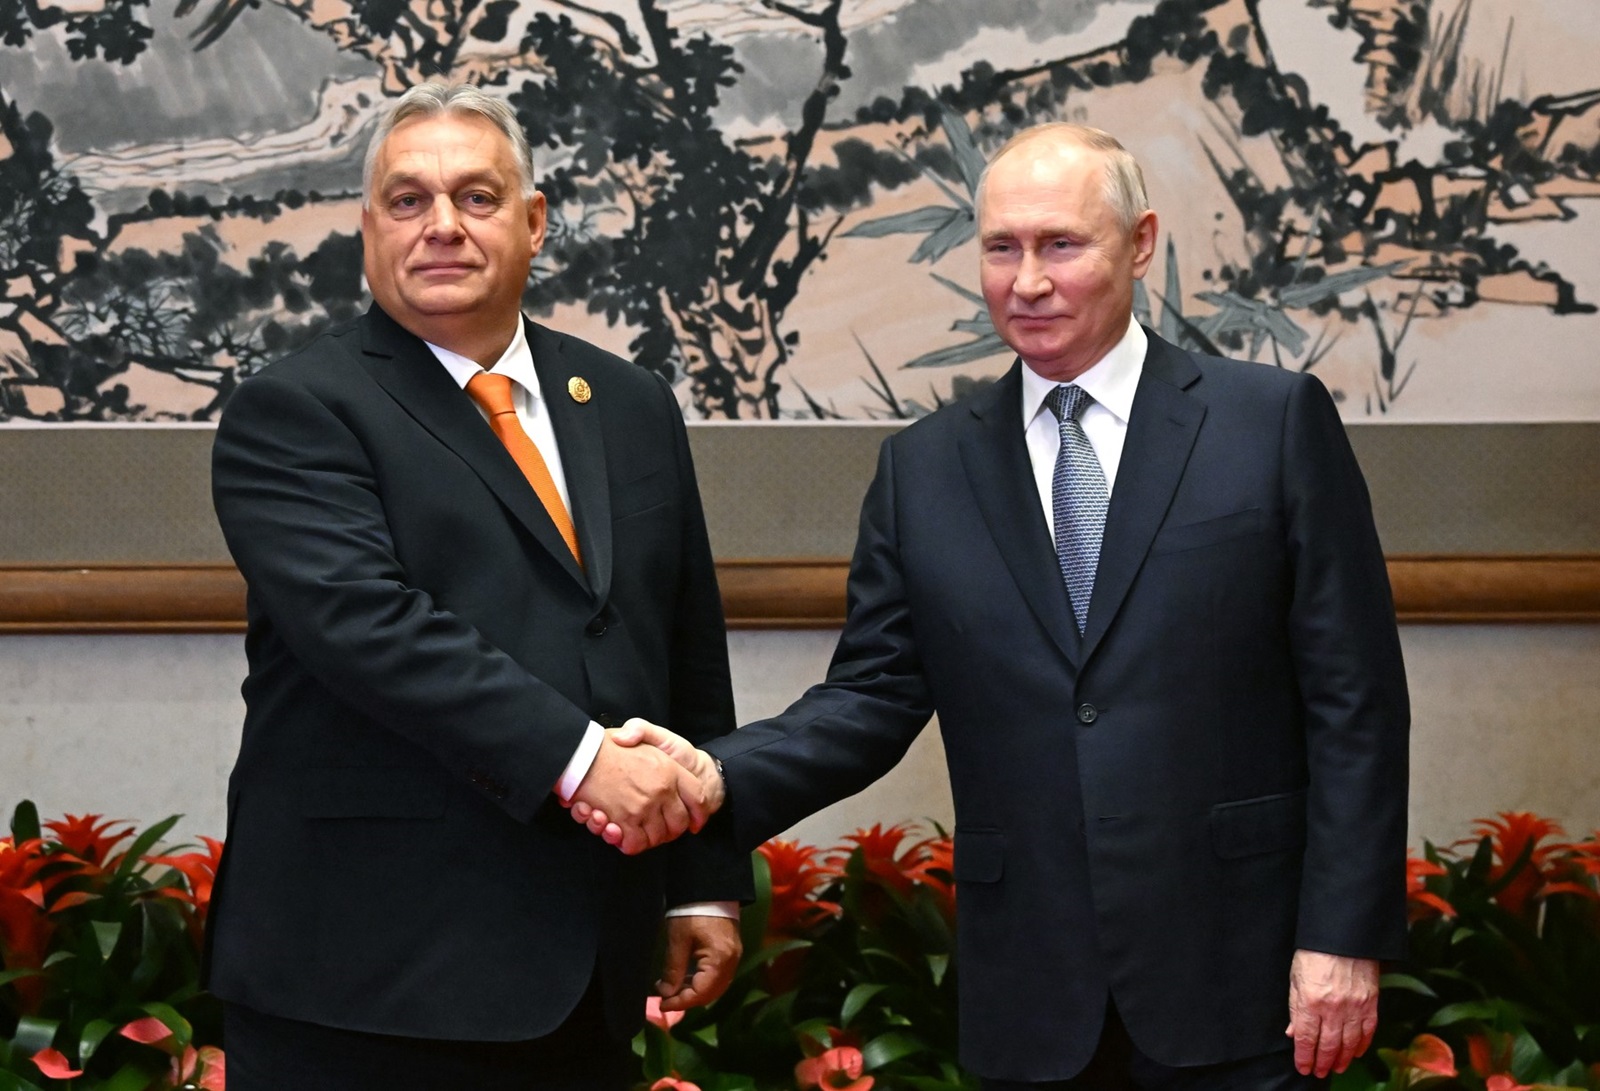 8537557 17.10.2023 Hungarian Prime Minister Viktor Orban and Russian President Vladimir Putin shake hands before their meeting as part of the 3rd Belt and Road Forum at the Diaoyutai State Guest House in Beijing, China.,Image: 814362447, License: Rights-managed, Restrictions: Editors' note: THIS IMAGE IS PROVIDED BY RUSSIAN STATE-OWNED AGENCY SPUTNIK., Model Release: no, Credit line: Grigory Sysoev / Sputnik / Profimedia